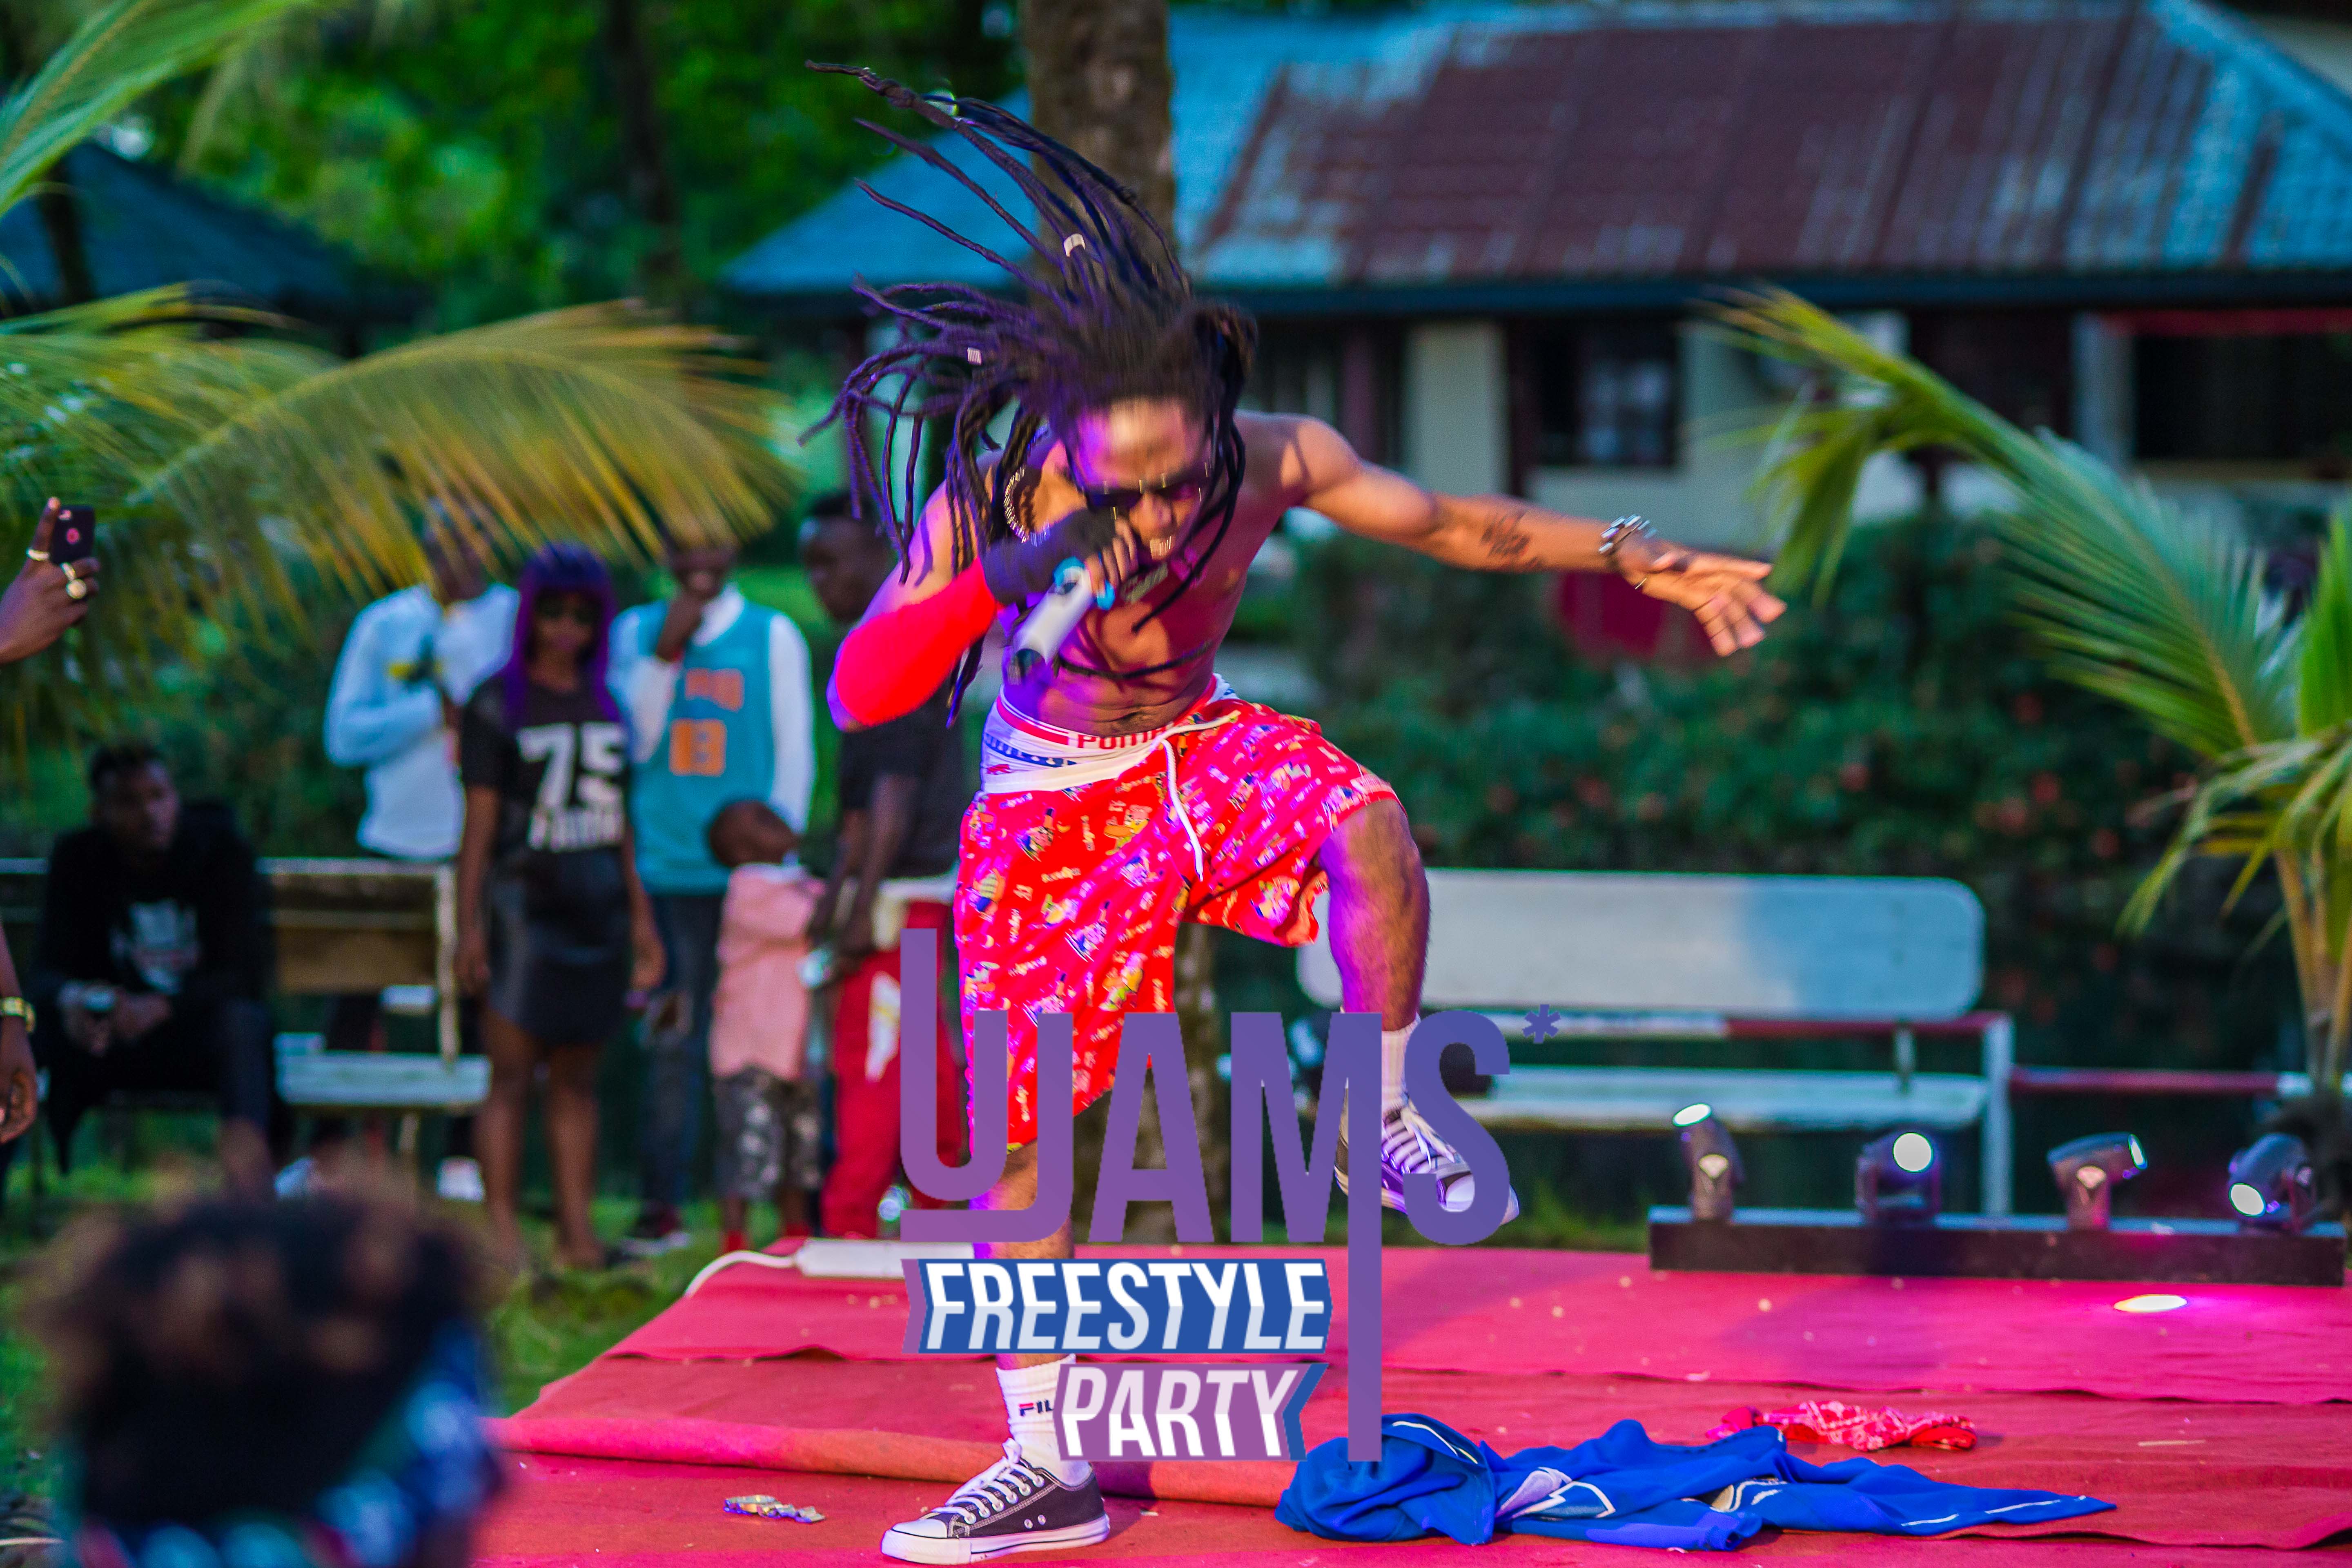 ujams freestyle party pictures